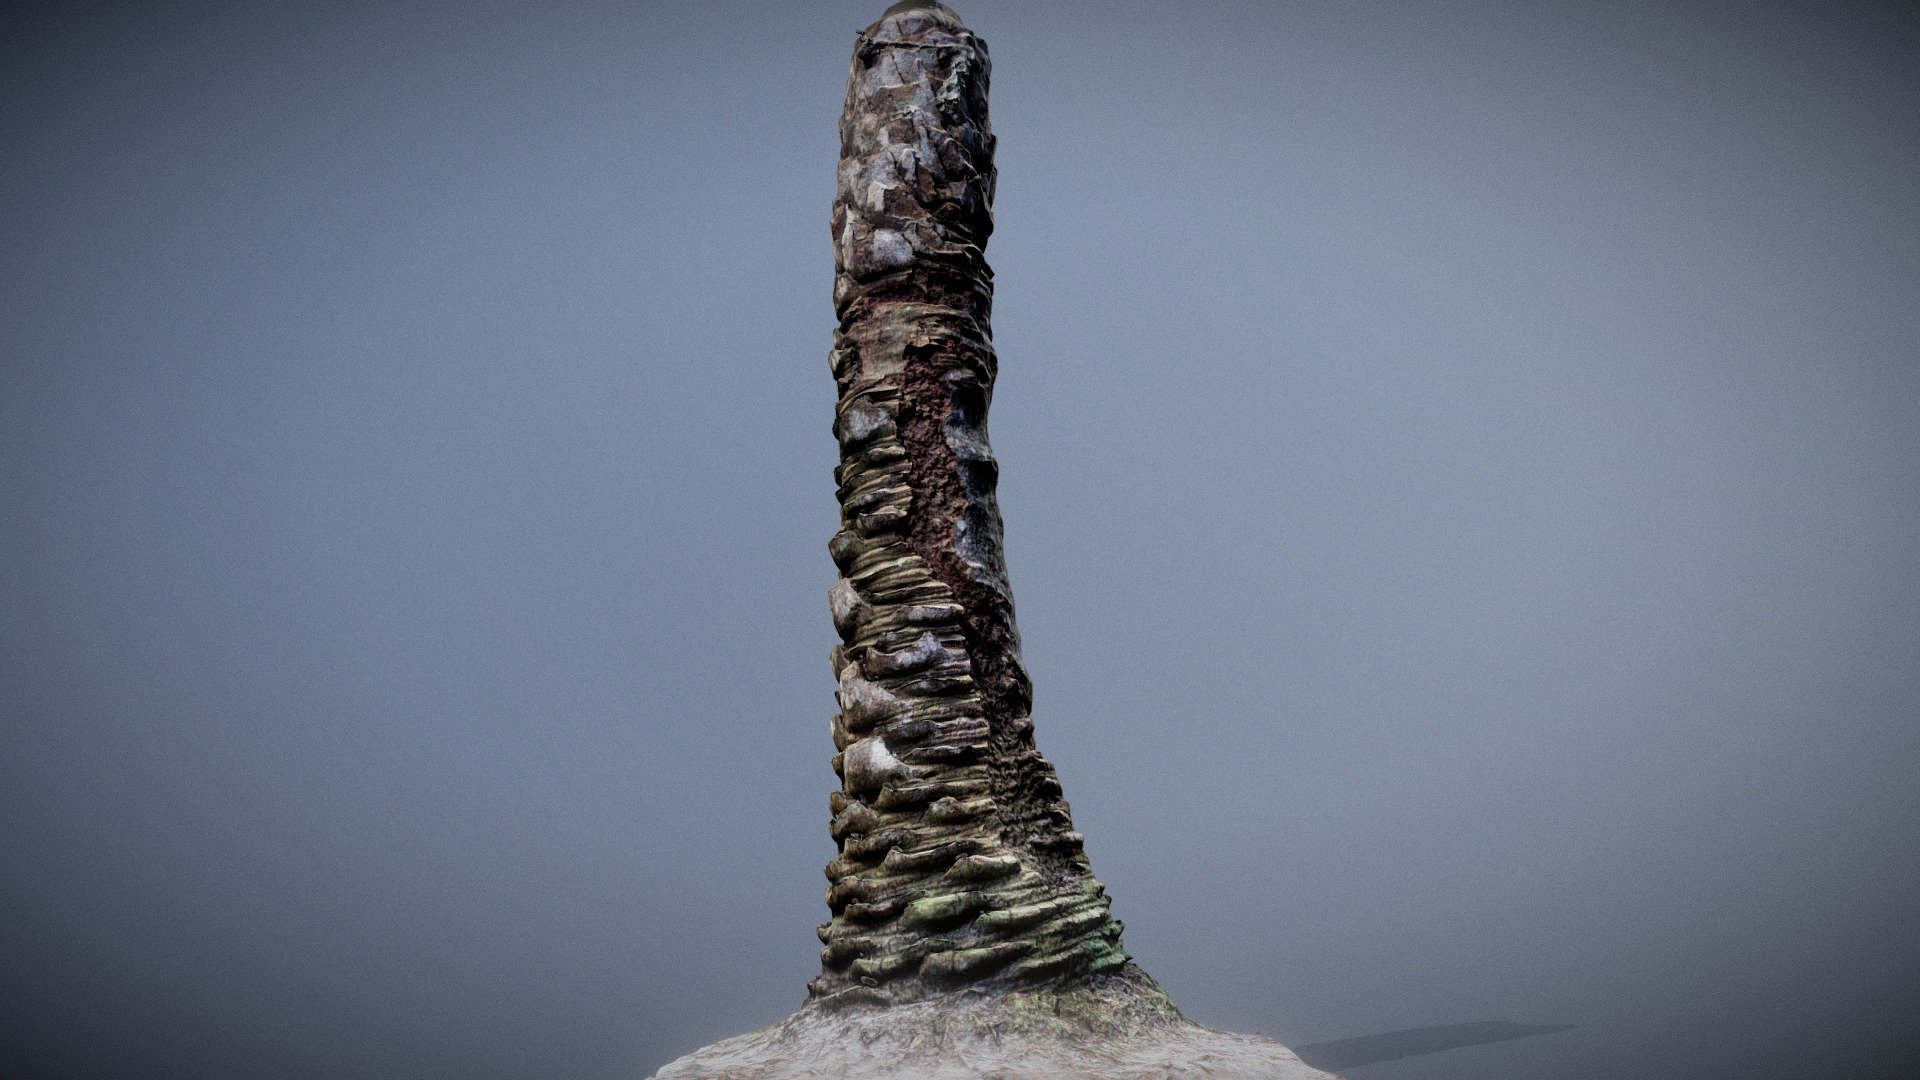 Baked version 002 - still 150k face target, but 8k color with 4k normal, roughness, ao

free cc0 midpoly D/L: https://skfb.ly/6QCqE

Earlier this week, in the dim light of an overcast evening here in the southeastern United States this tree became the subject of roughly 2 minutes of hasty video scraping with my iPhone.

Please enjoy this hastily baked mid-poly mesh made by baking a dense cloud onto a mid-poly quad mesh generated from the cloud. Here’s a link to the point cloud that was used (no input textures used for bake, only vertex color on dense mesh) ;) https://skfb.ly/6QADy

and the prior version (001) is here https://skfb.ly/6QBWE

Houdini was the primary tool used for all geometry work, baking and GLTF export for Sketchfab. The UVs were automatically generated and need more work, but parts of this look great to me so I’m posting it as yet another watermark.

Thank you for visiting! - Alan/Organic

Tools used: youtube-dl, ffmpeg, python, colmap, houdini

https://www.instagram.com/organiccomputer/ - Palm-tree-trunk-002-150k-faces-8k-color-tex - 3D model by OrganicComputer (@artbyorganic) 3d model